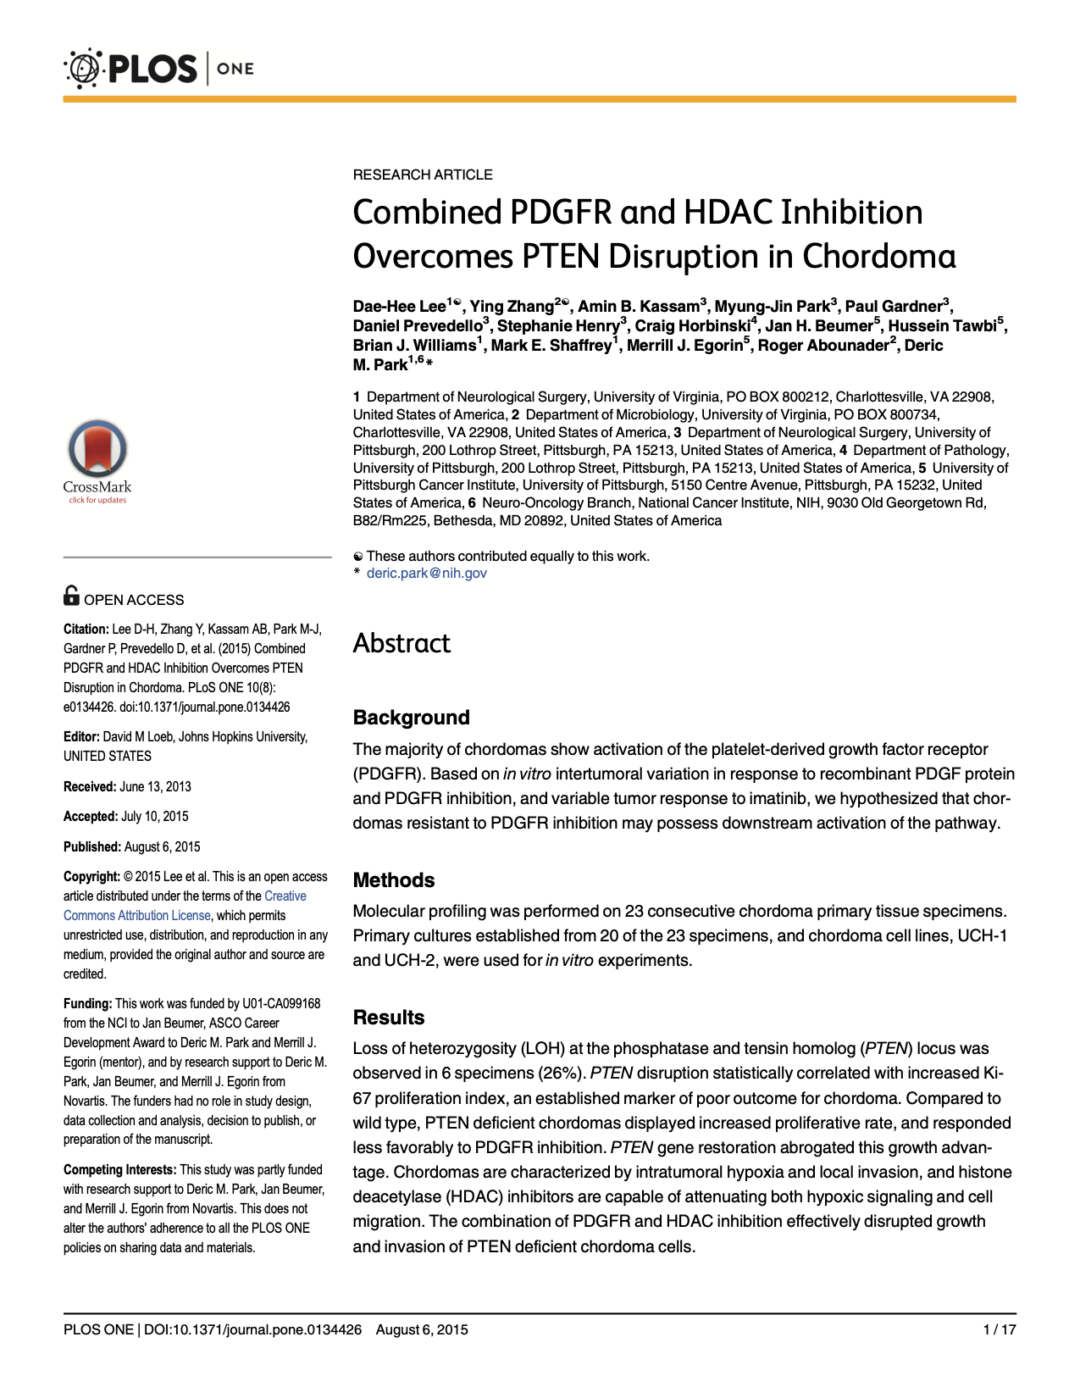 Combined PDGFR and HDAC Inhibition Overcomes PTEN Disruption in Chordoma